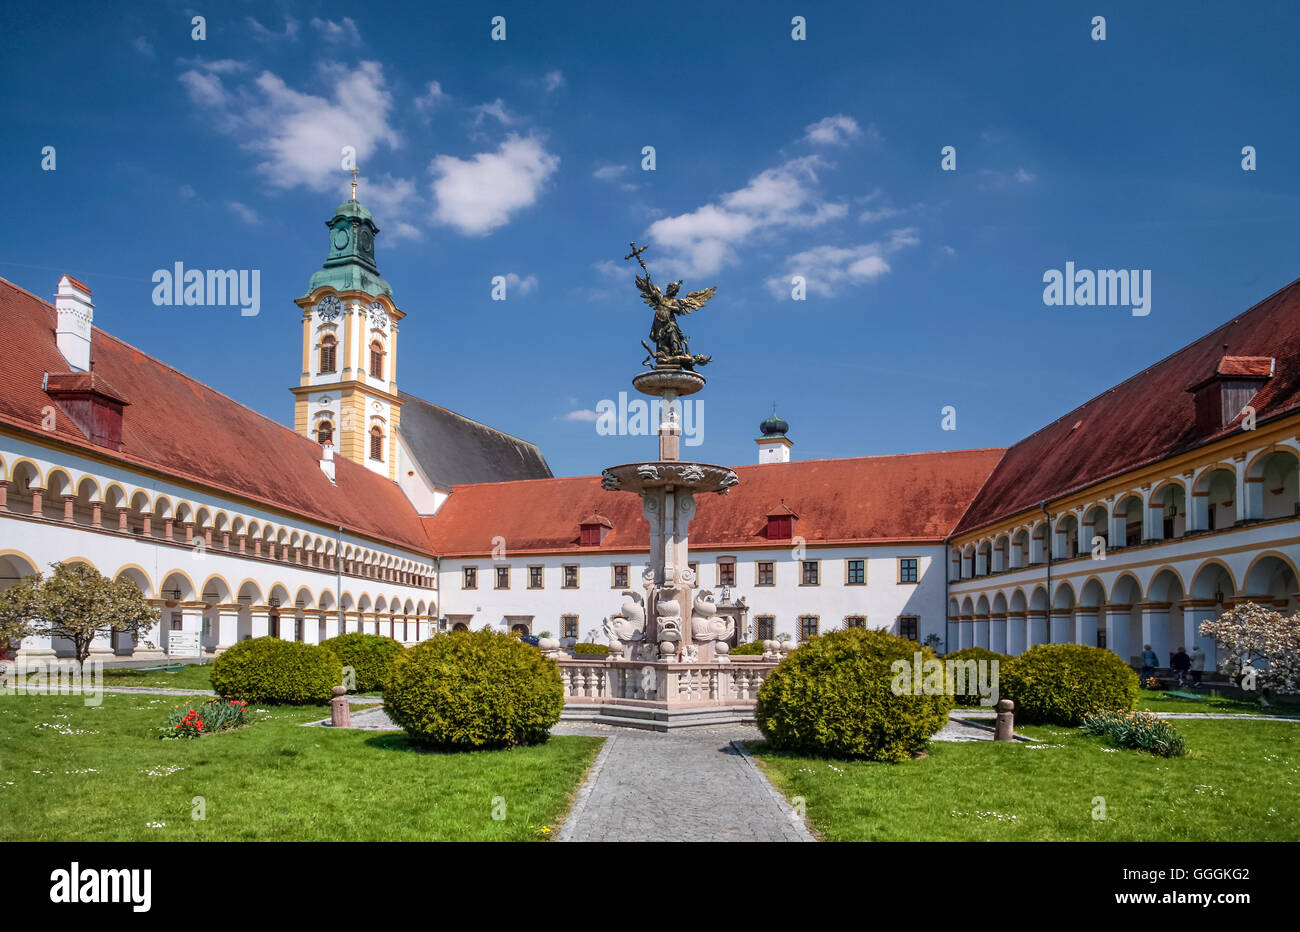 Reichersberg High Resolution Stock Photography and Images - Alamy